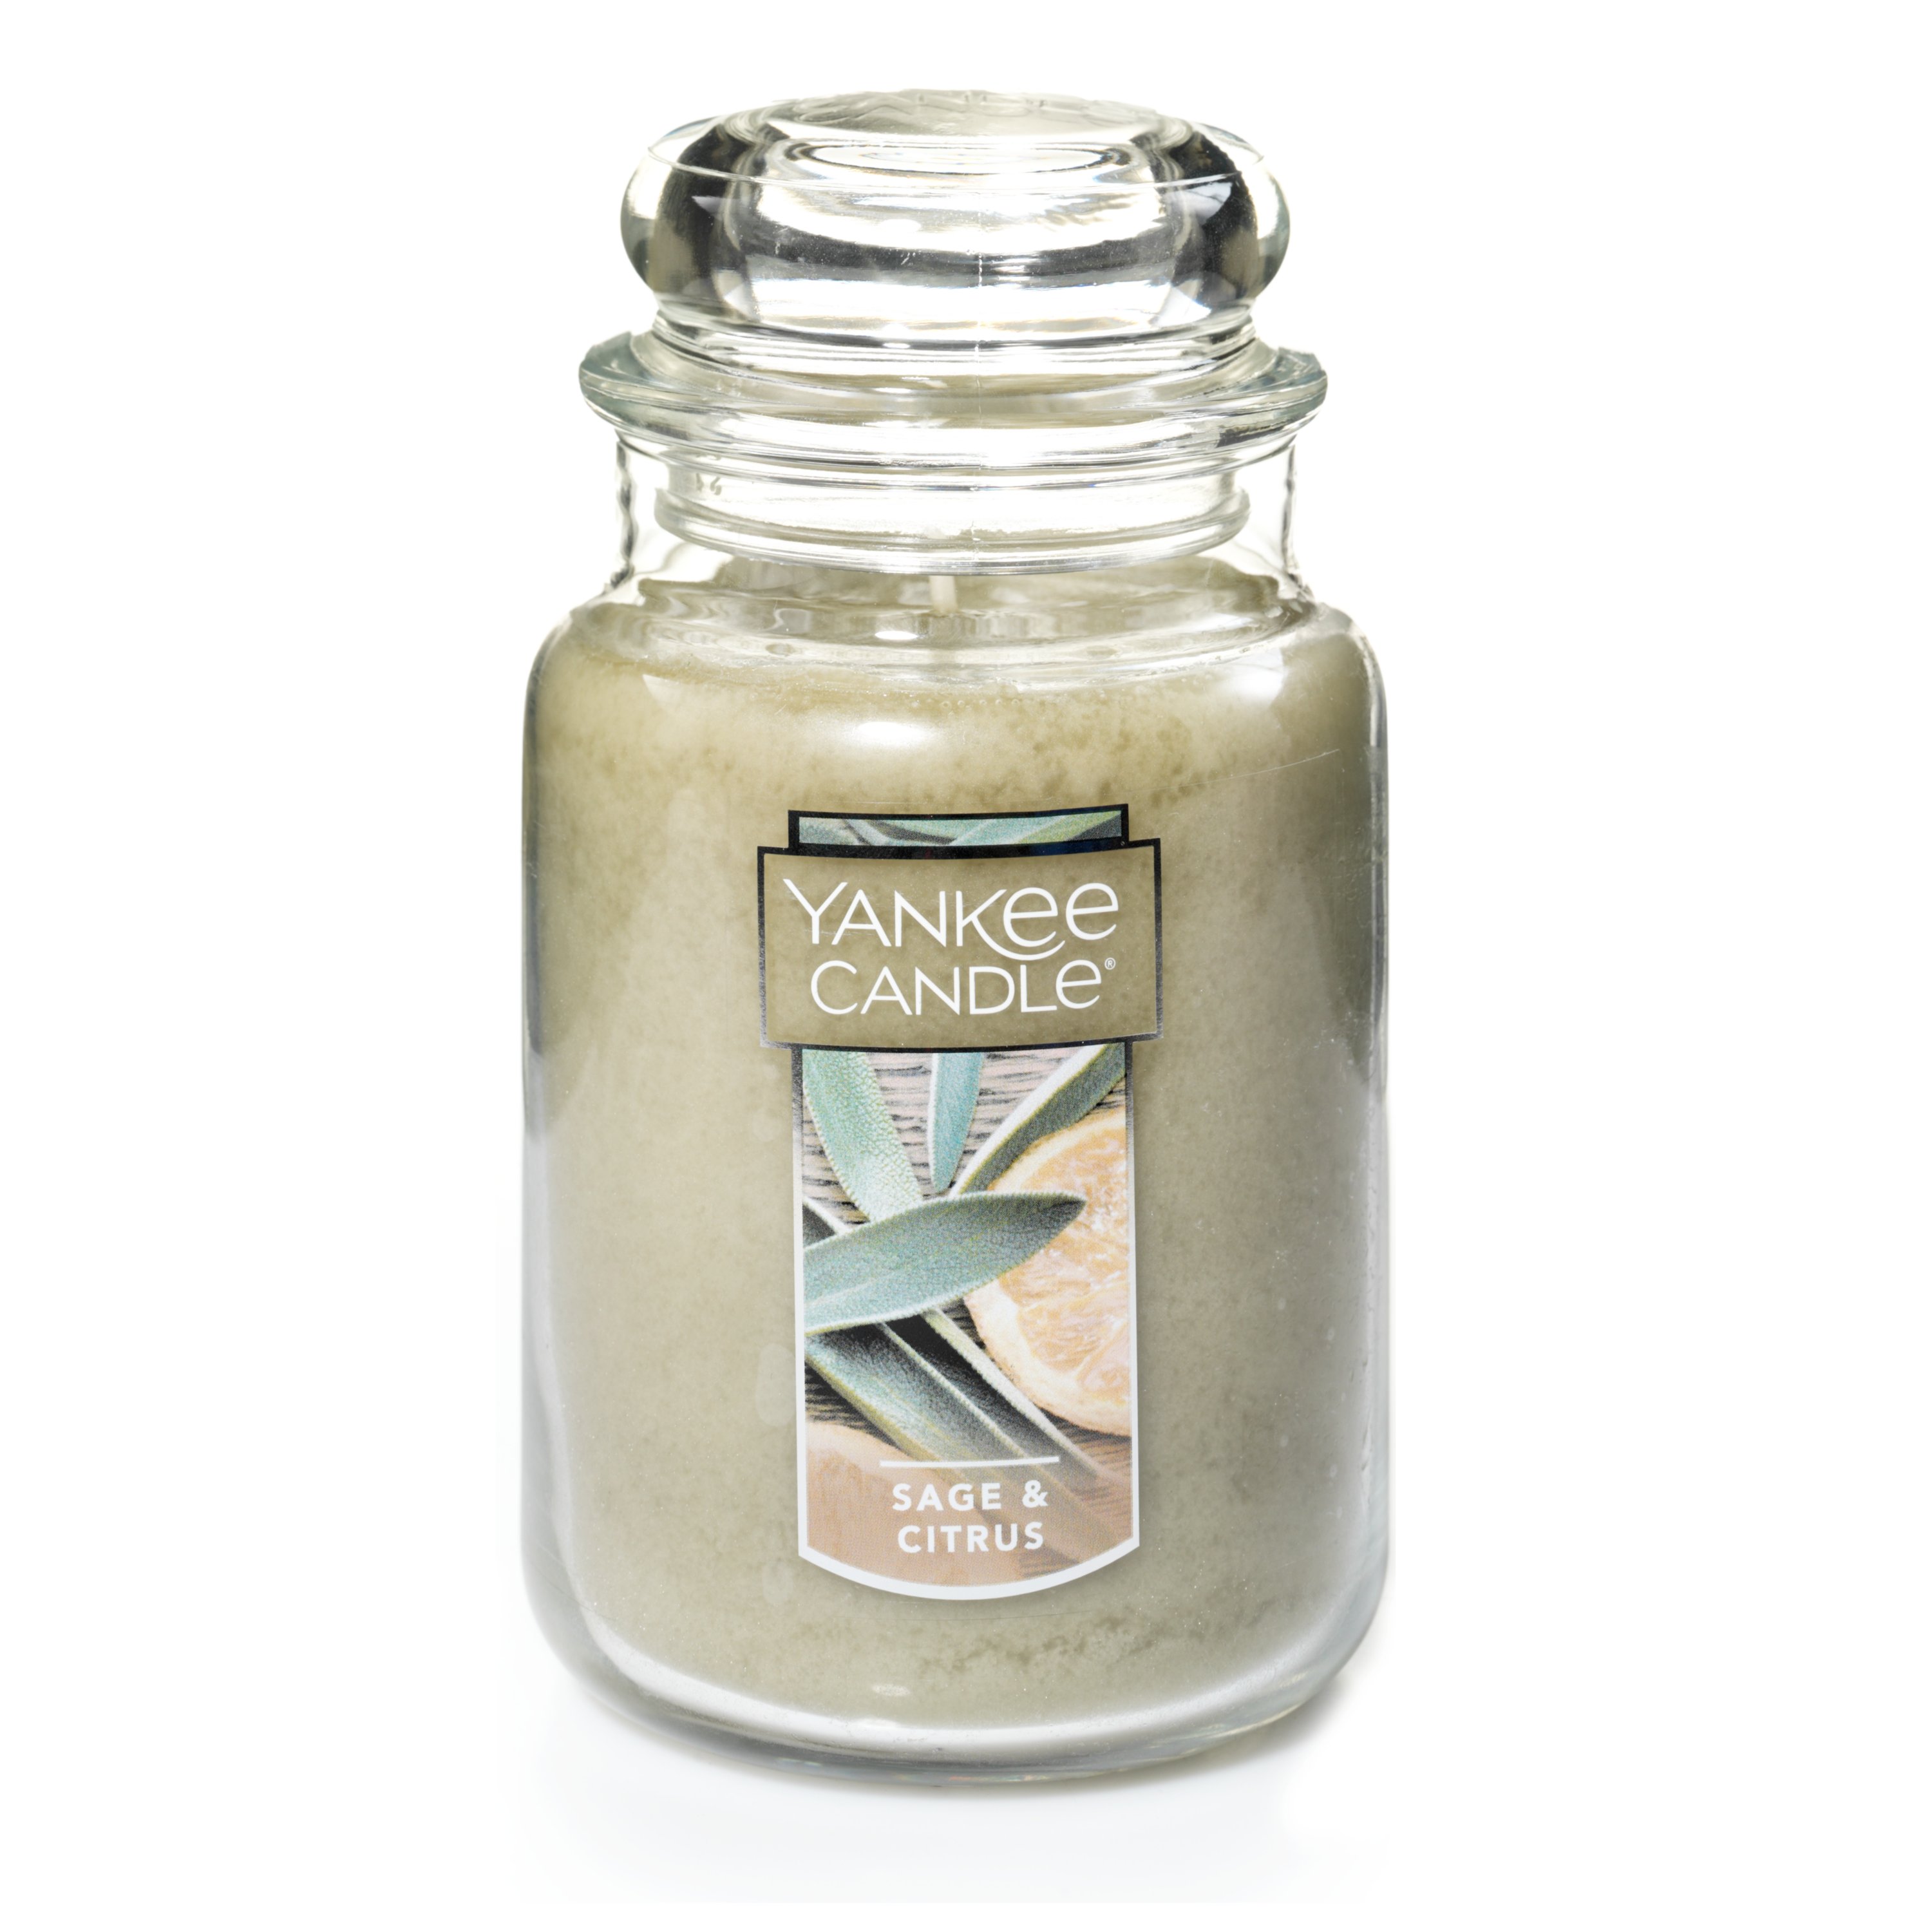 Yankee Candle - Our new Lavender & Sage fragrance and fan